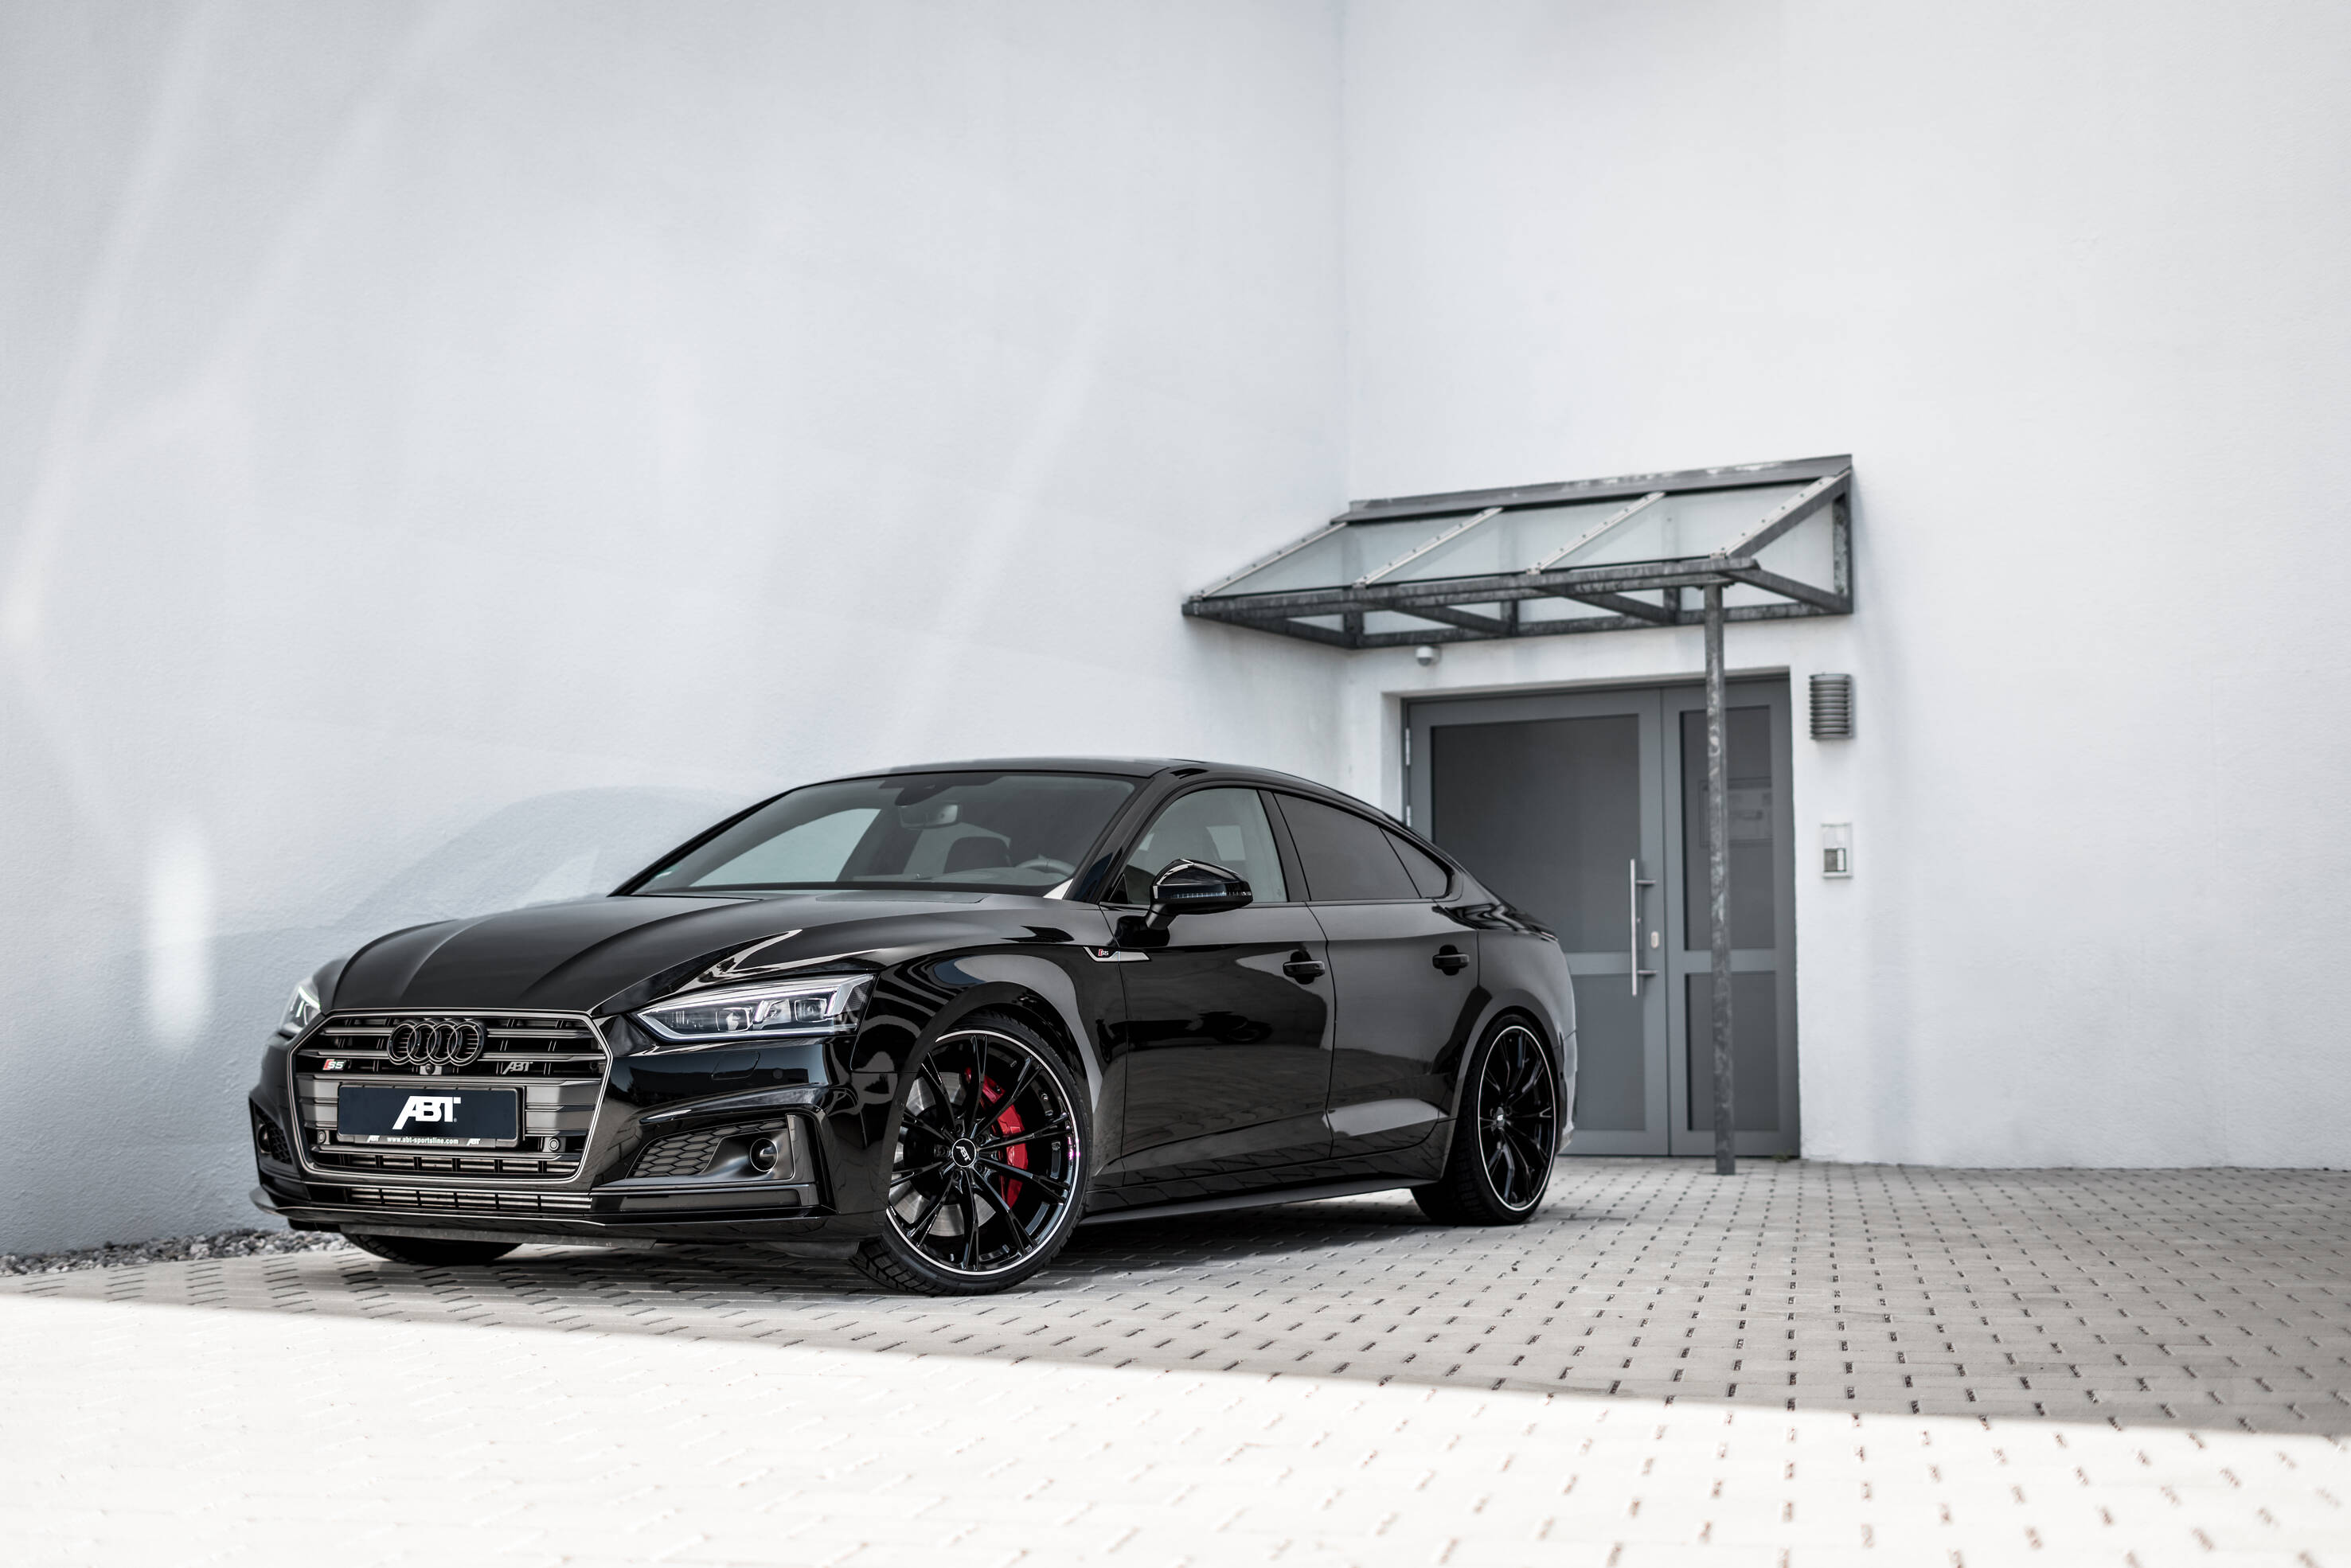 Facelift by Audi – Performance upgrade by ABT - Audi Tuning, VW Tuning, Chiptuning  von ABT Sportsline.